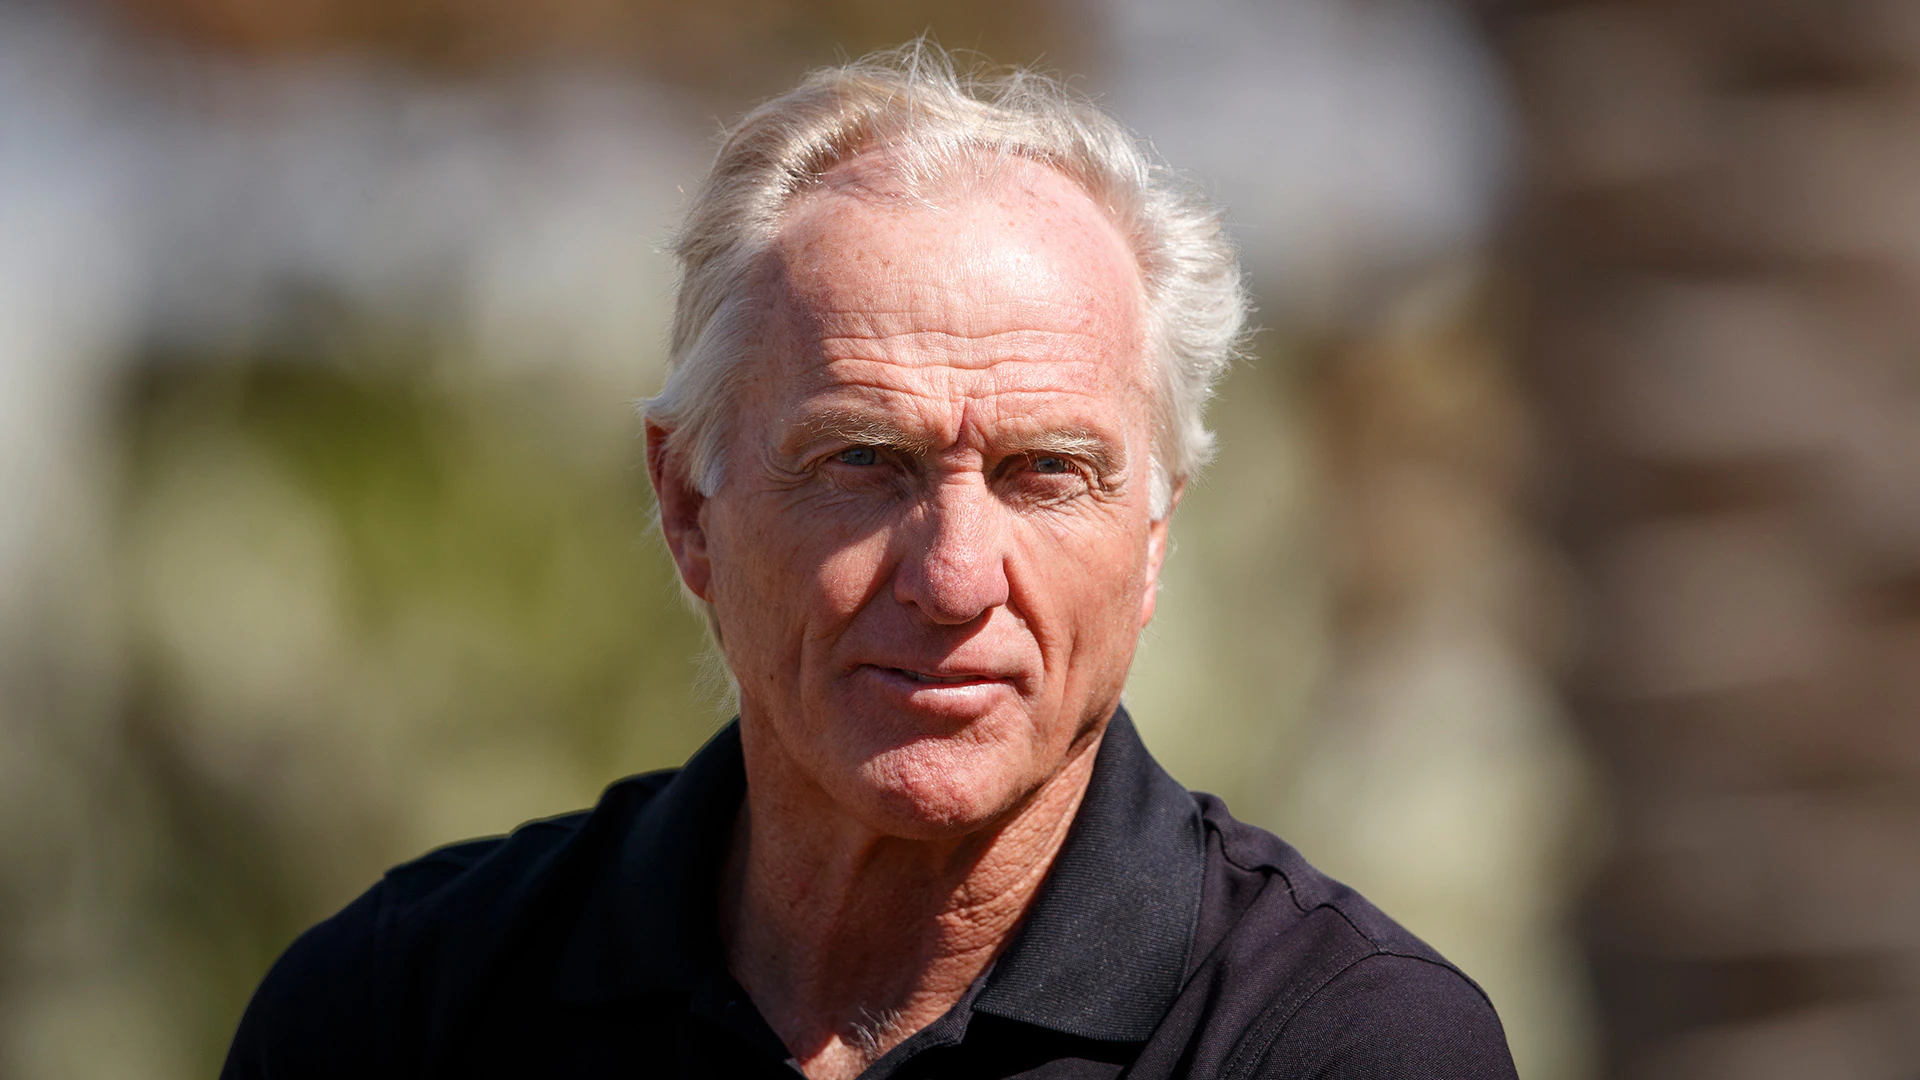 Greg Norman hopeful for special exemption to play in Open Championship at St. Andrews